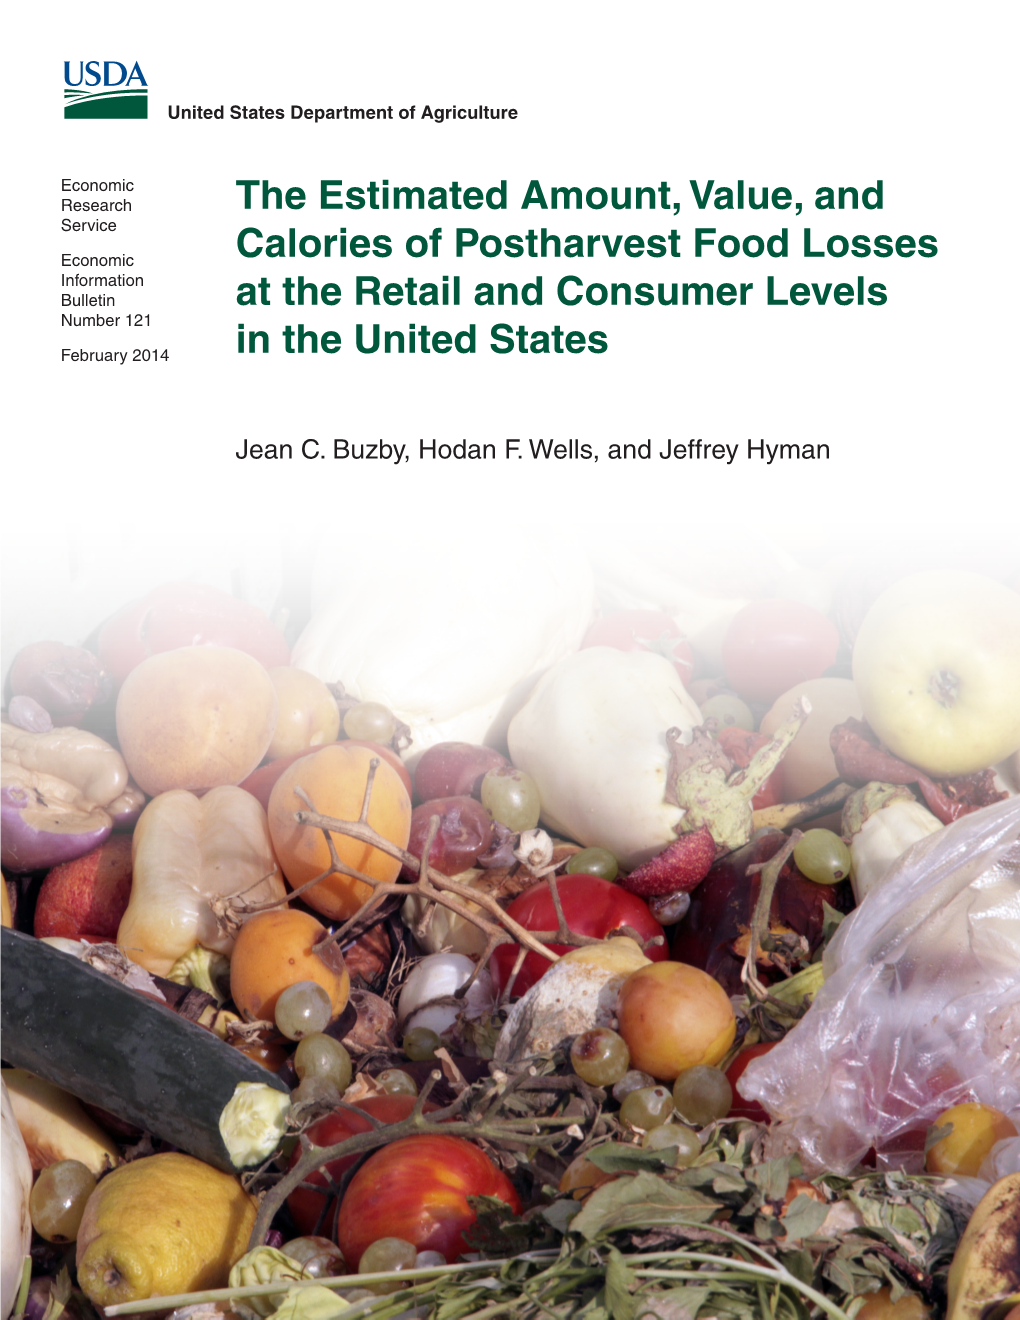 The Estimated Amount, Value, and Calories of Postharvest Food Losses at the Retail and Consumer Levels in the United States, EIB-121, U.S